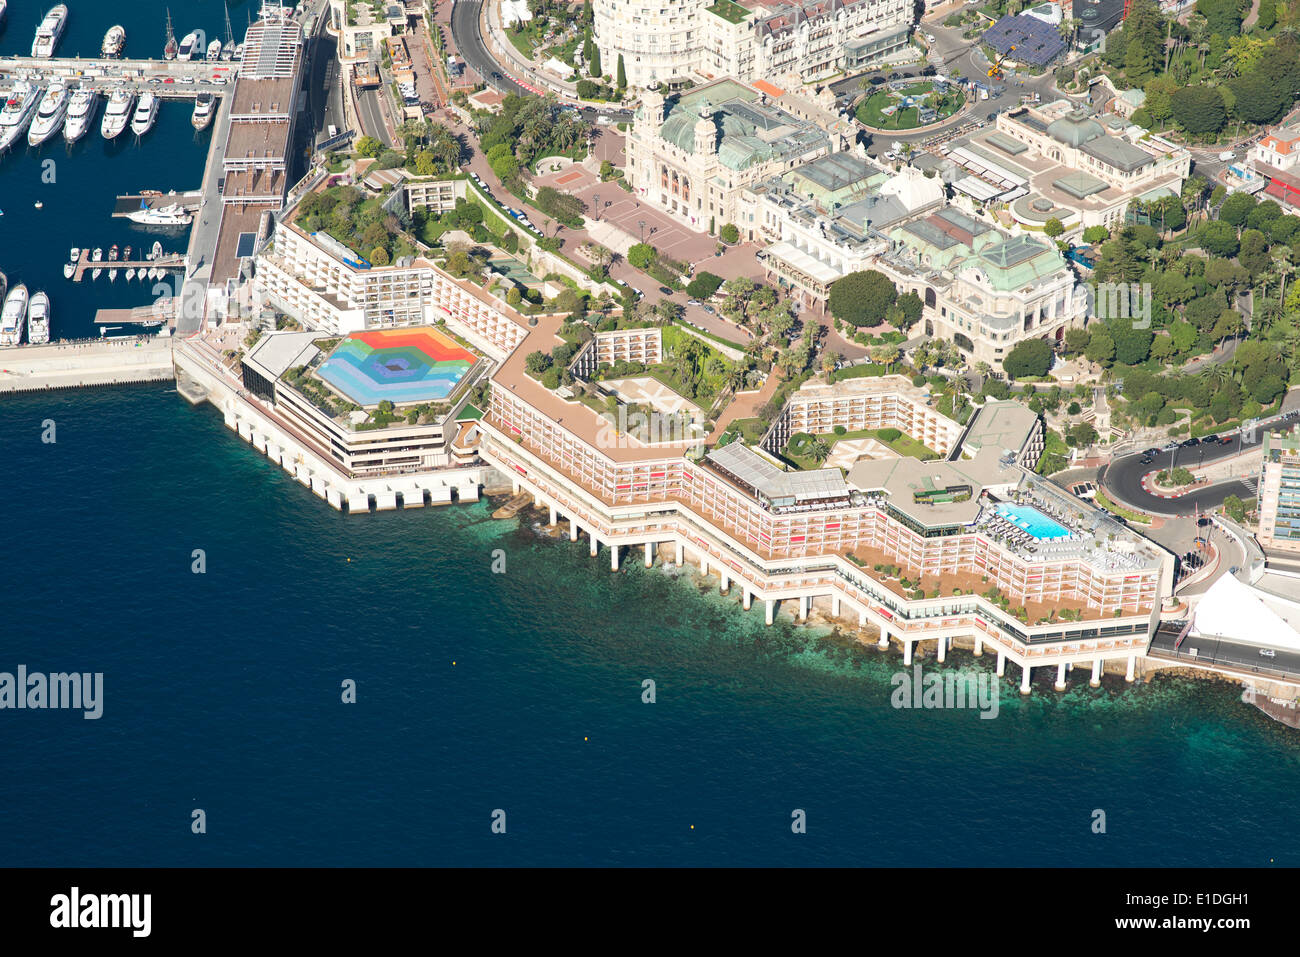 AERIAL VIEW. Fairmont Hotel on the seafront with the Monte-Carlo Casino standing behind. Ward of Monte-Carlo, Principality of Monaco. Stock Photo